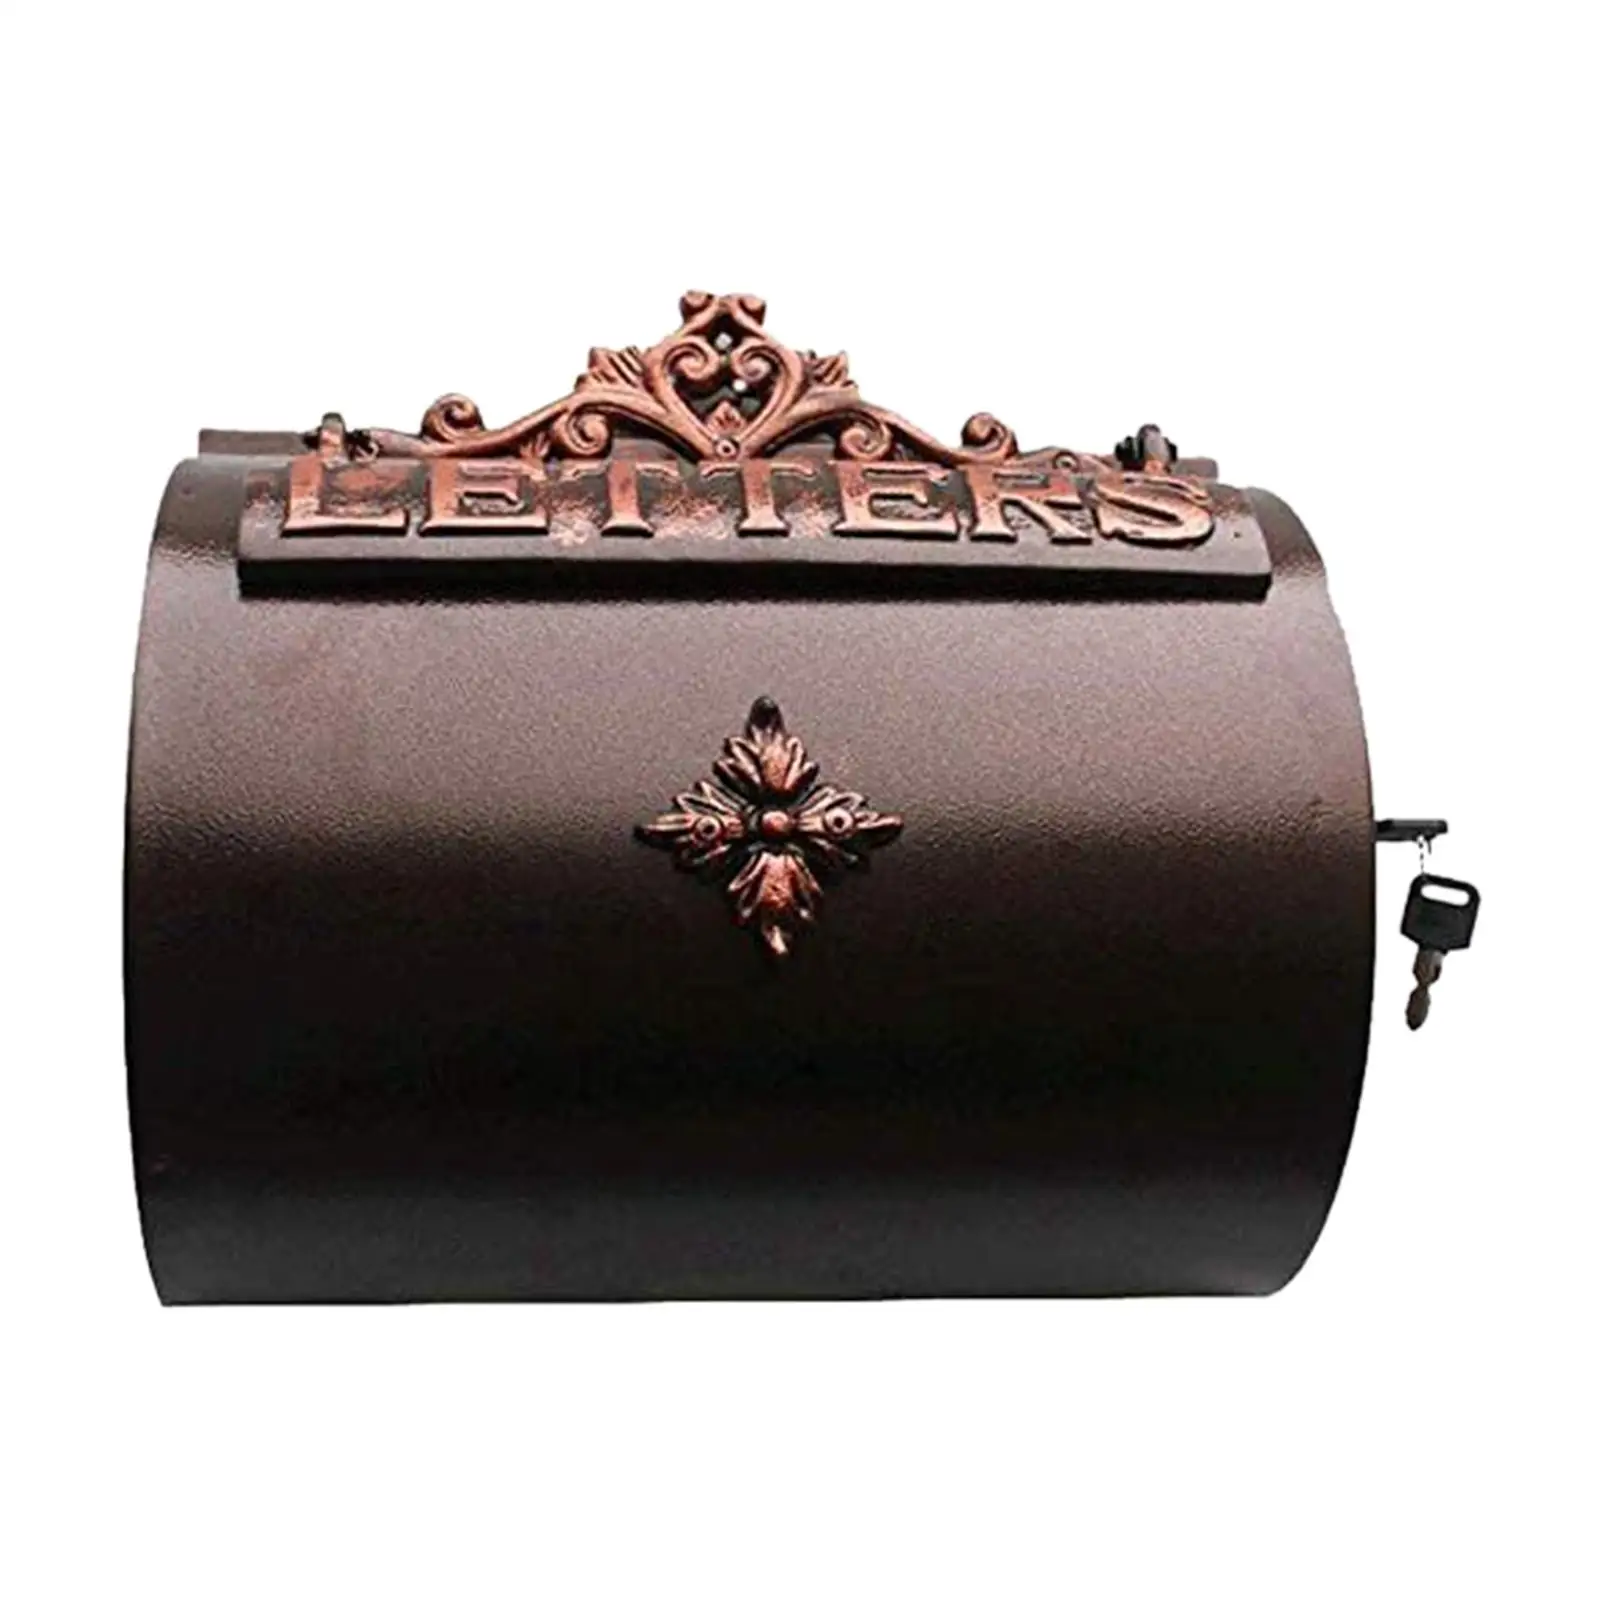 Pastoral Retro Letter Box with Key Lock Villa Outdoor Letter Box Retro Residential Mail Box Wall Mounted Mailbox